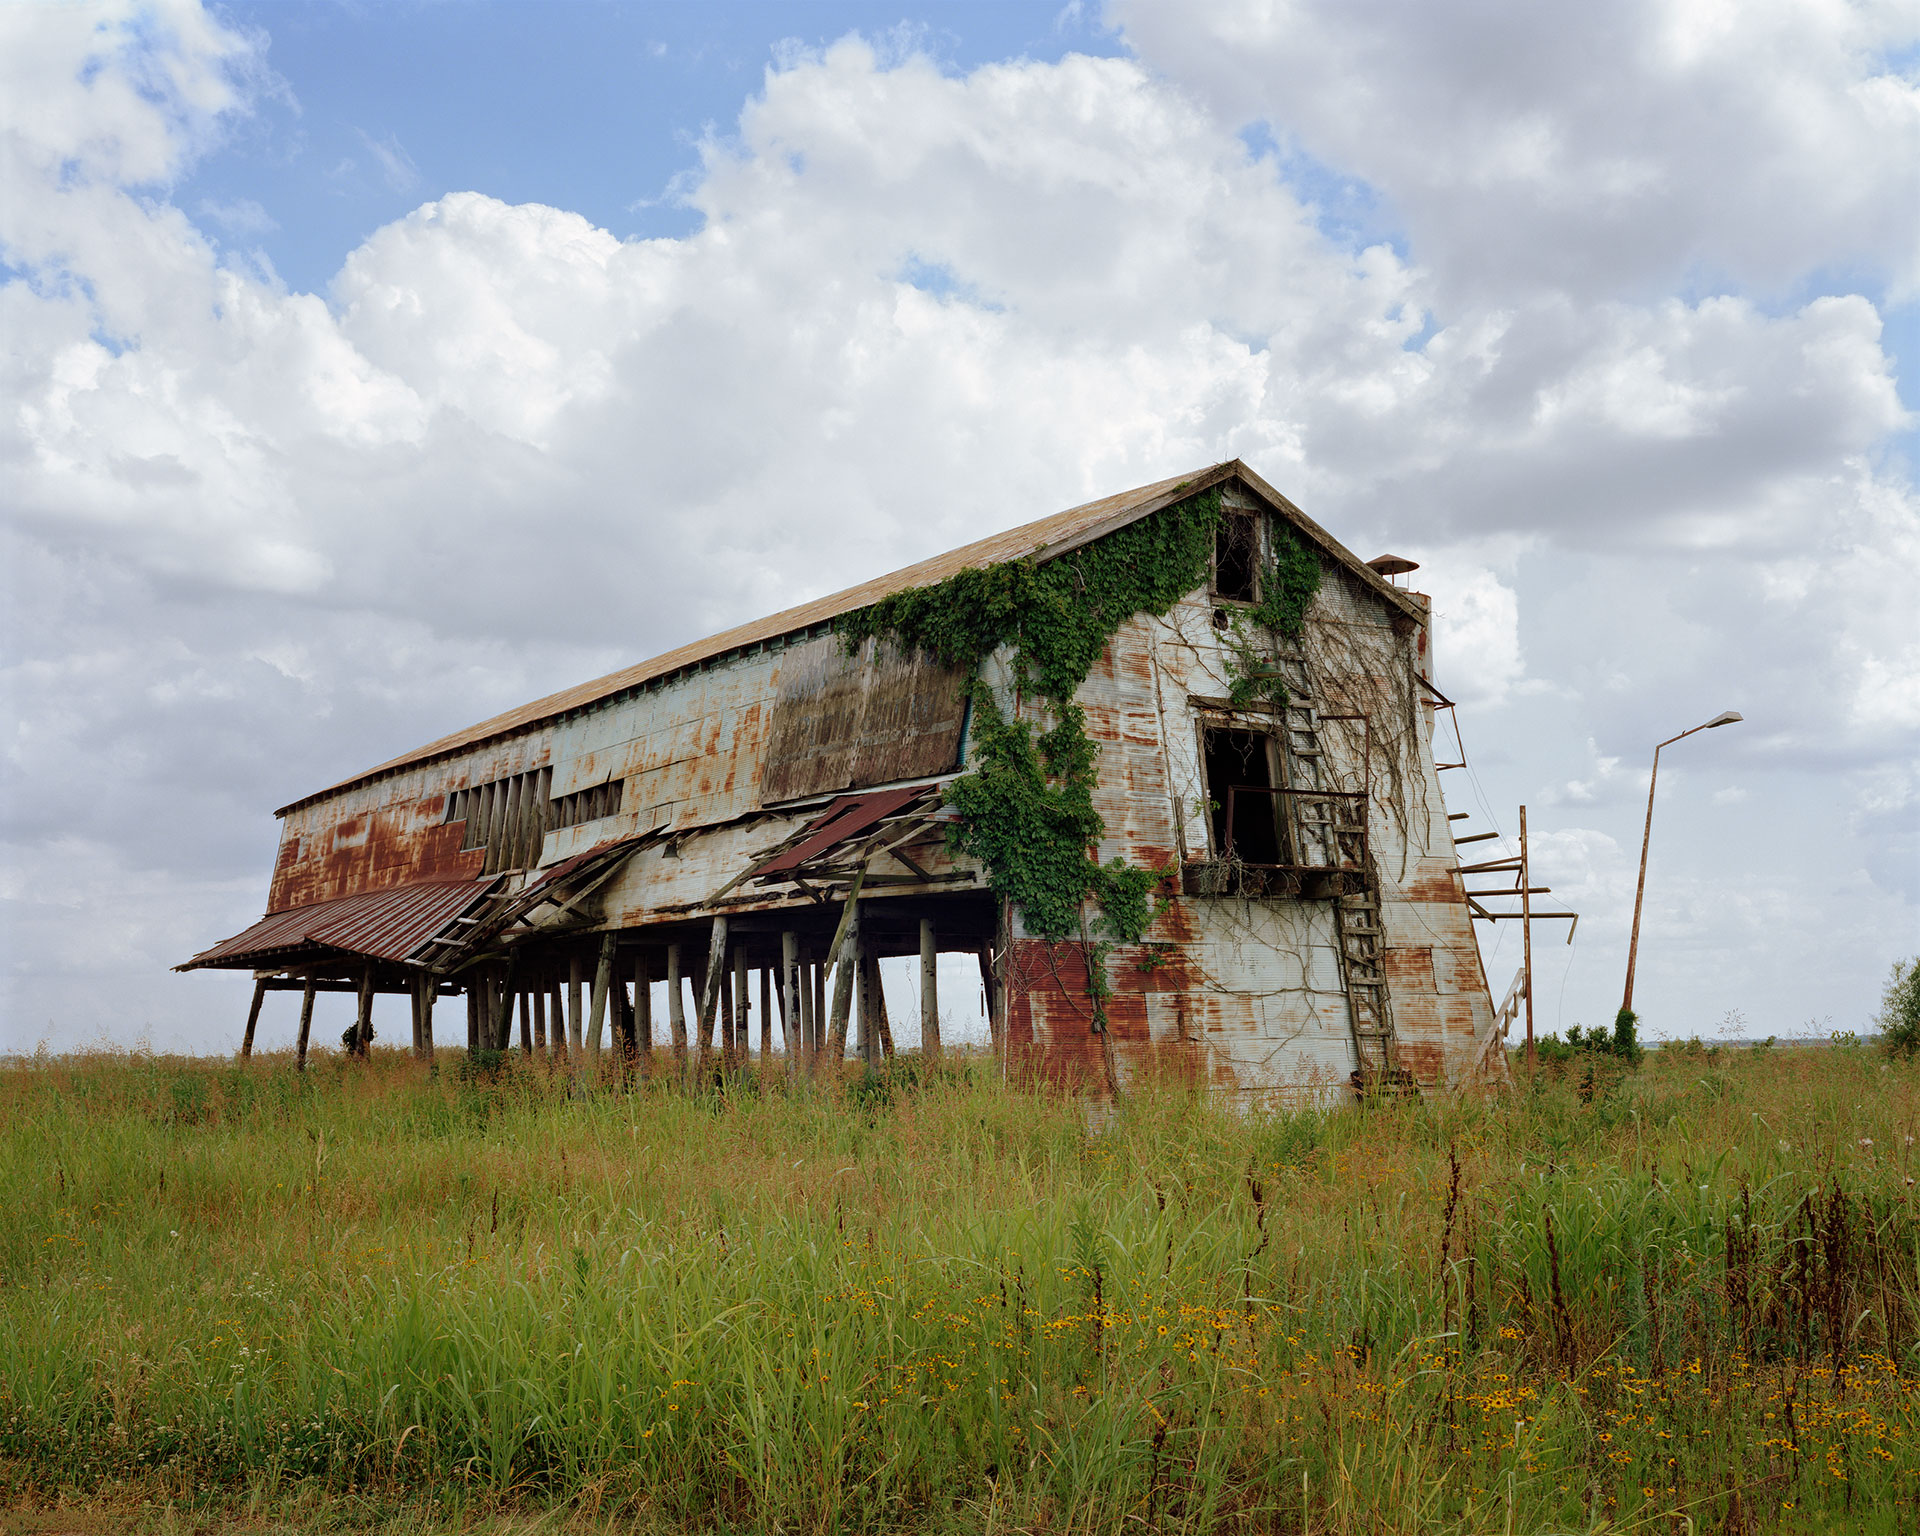 Anderson Cotton Gin, Clarksdale, Mississippi